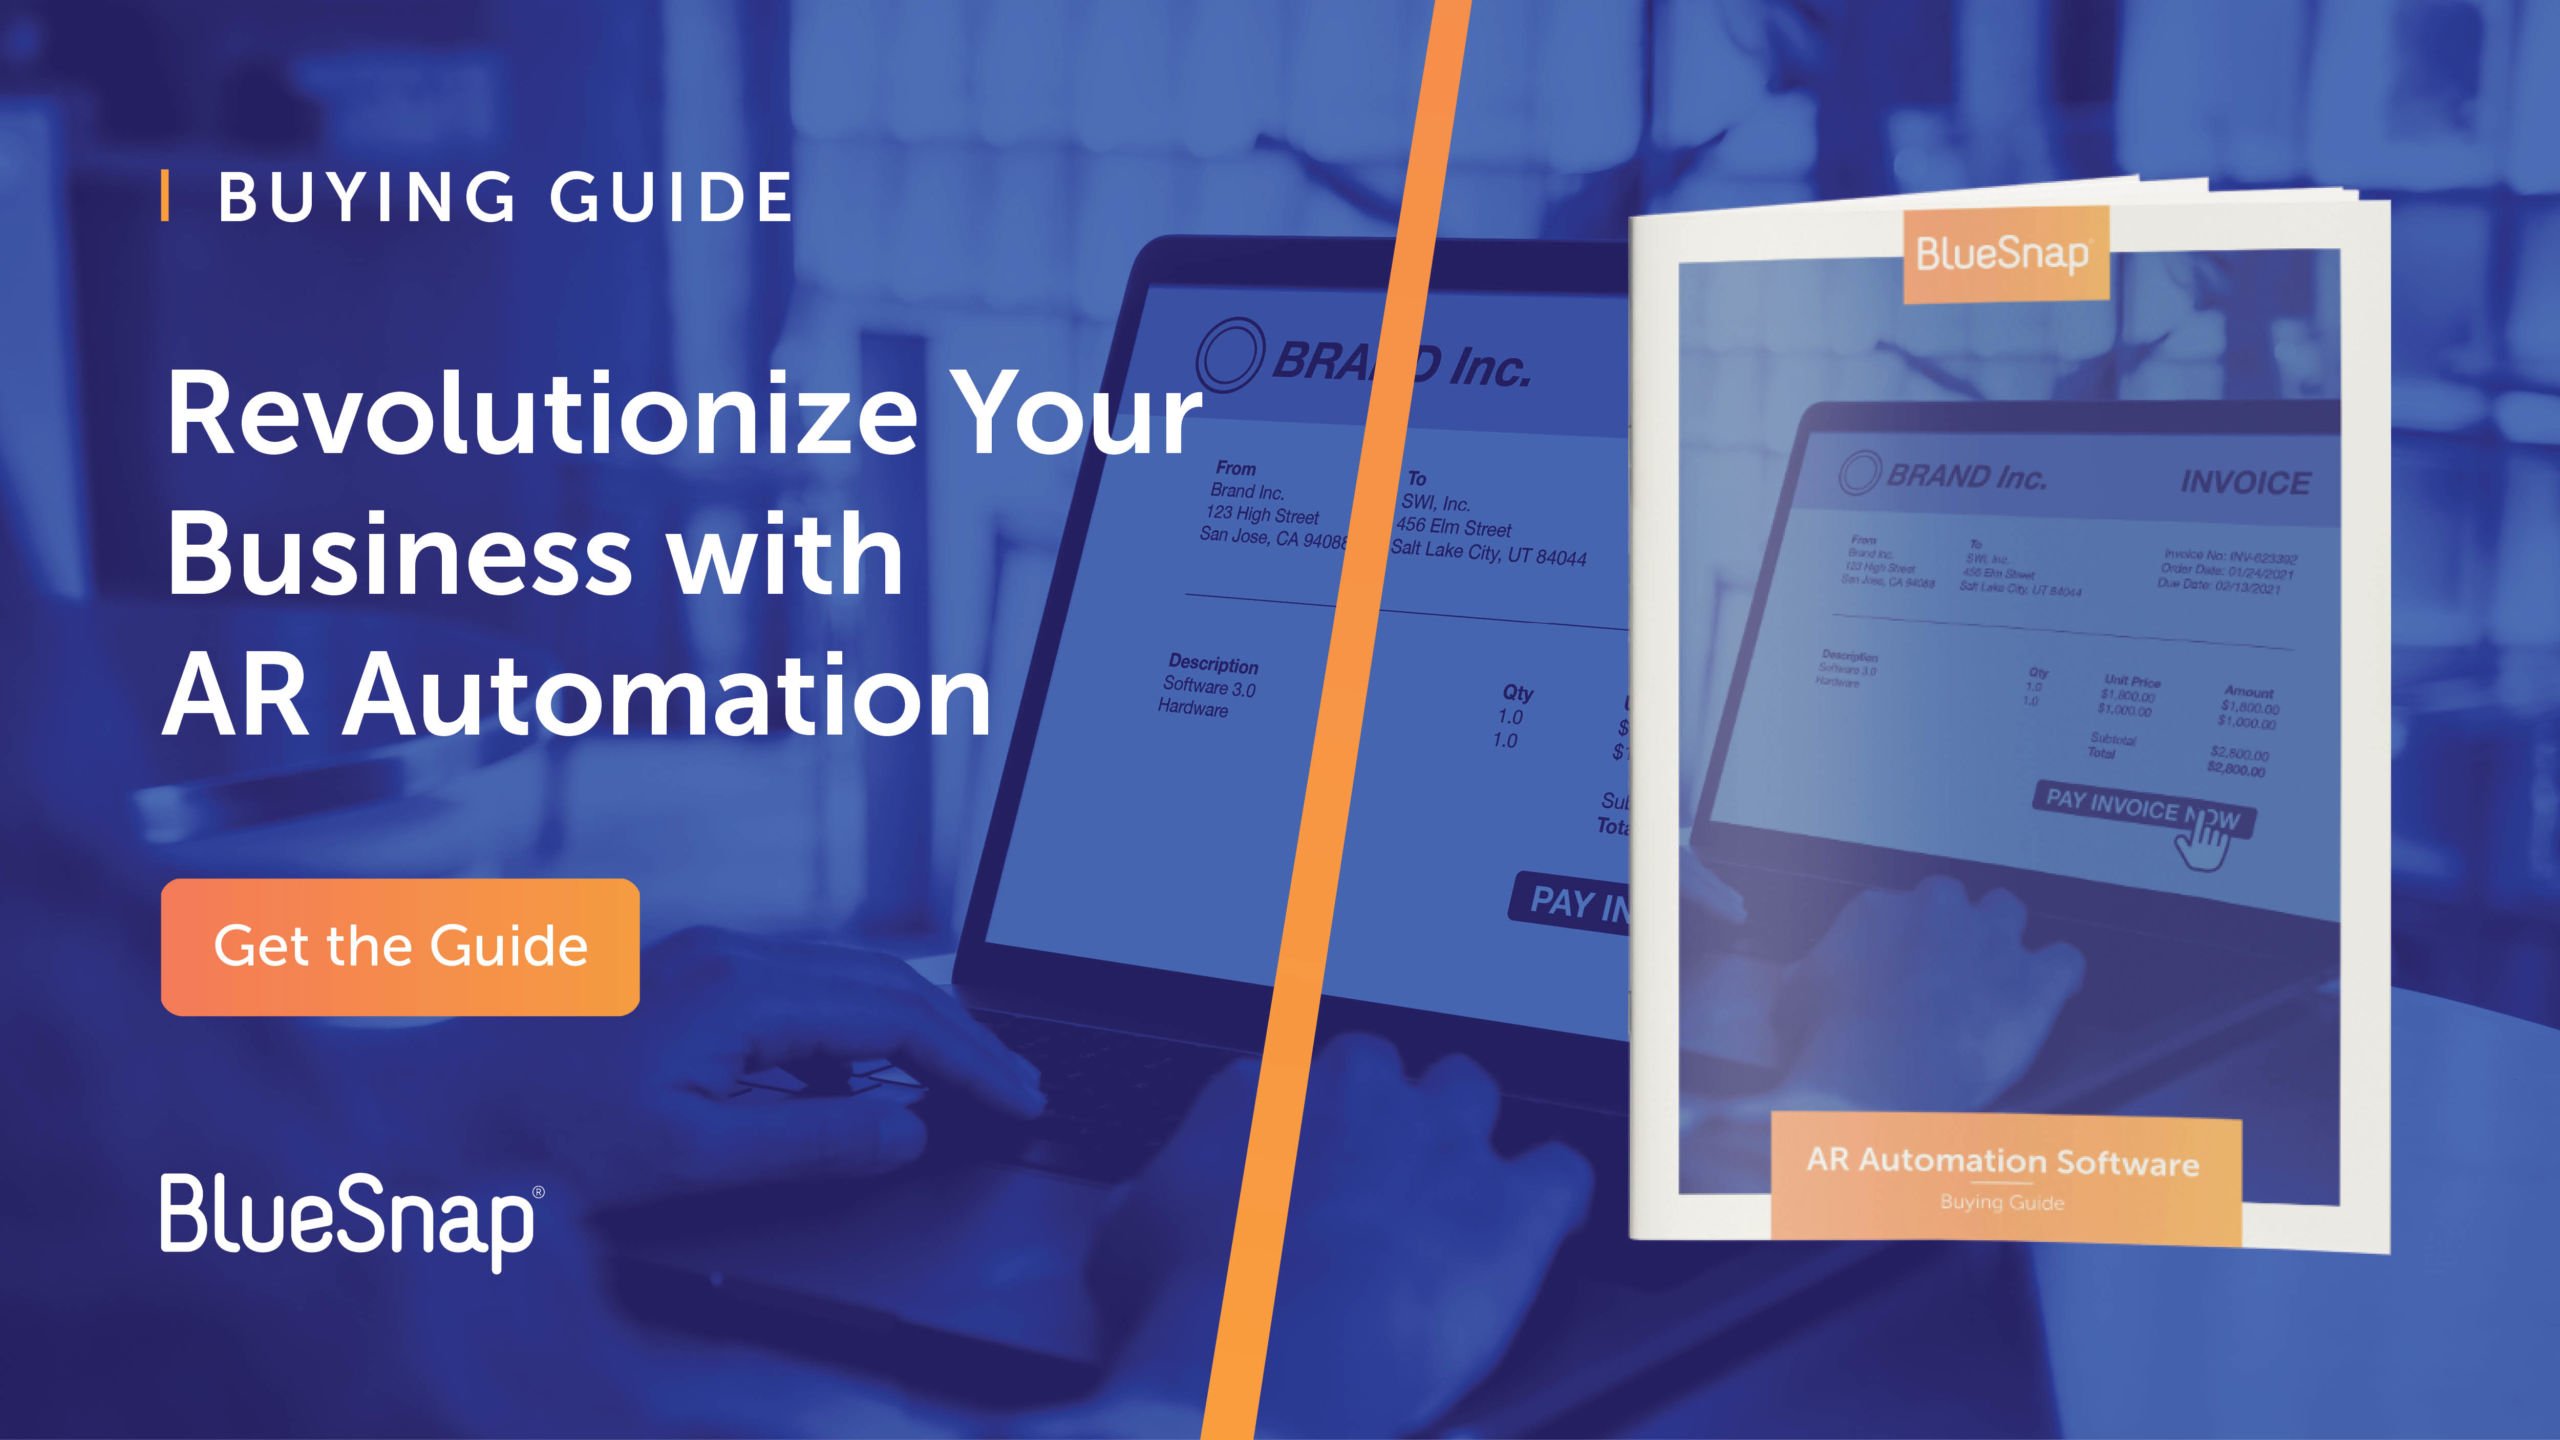 Get the AR Automation Software Buying Guide and revolutionize your business with AR automation!